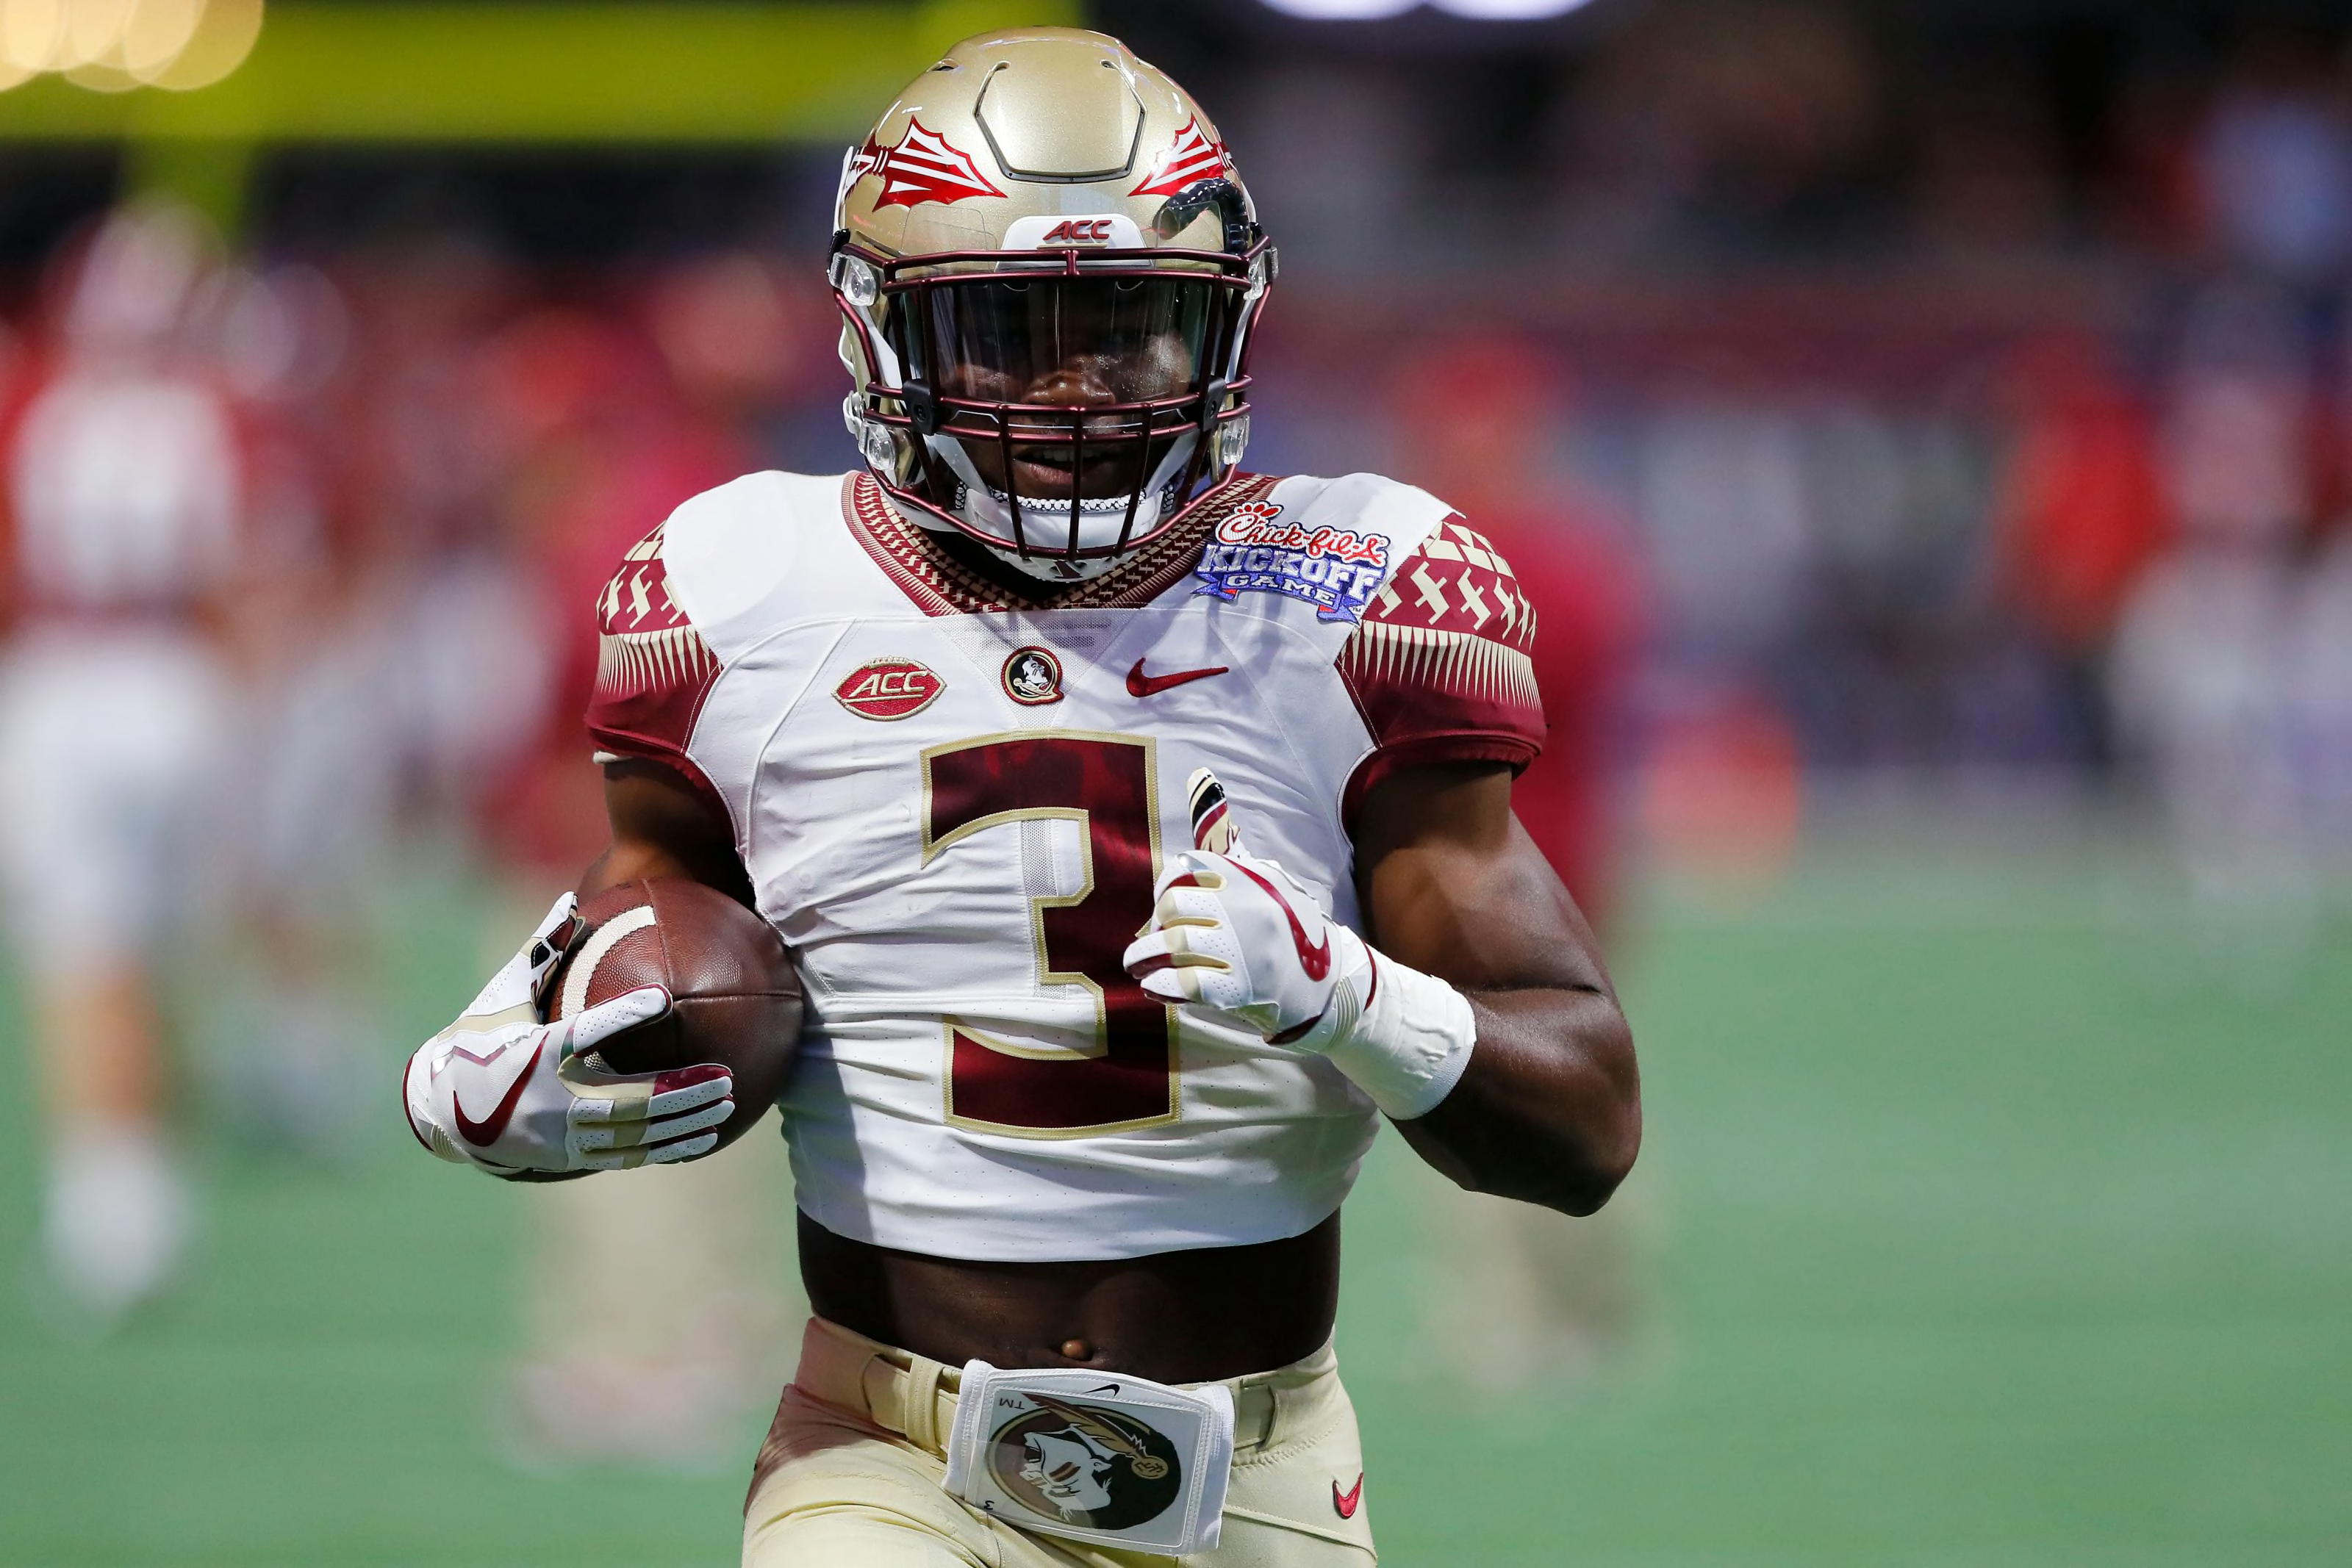 FSU football: Why Cam Akers will be even better in the NFL